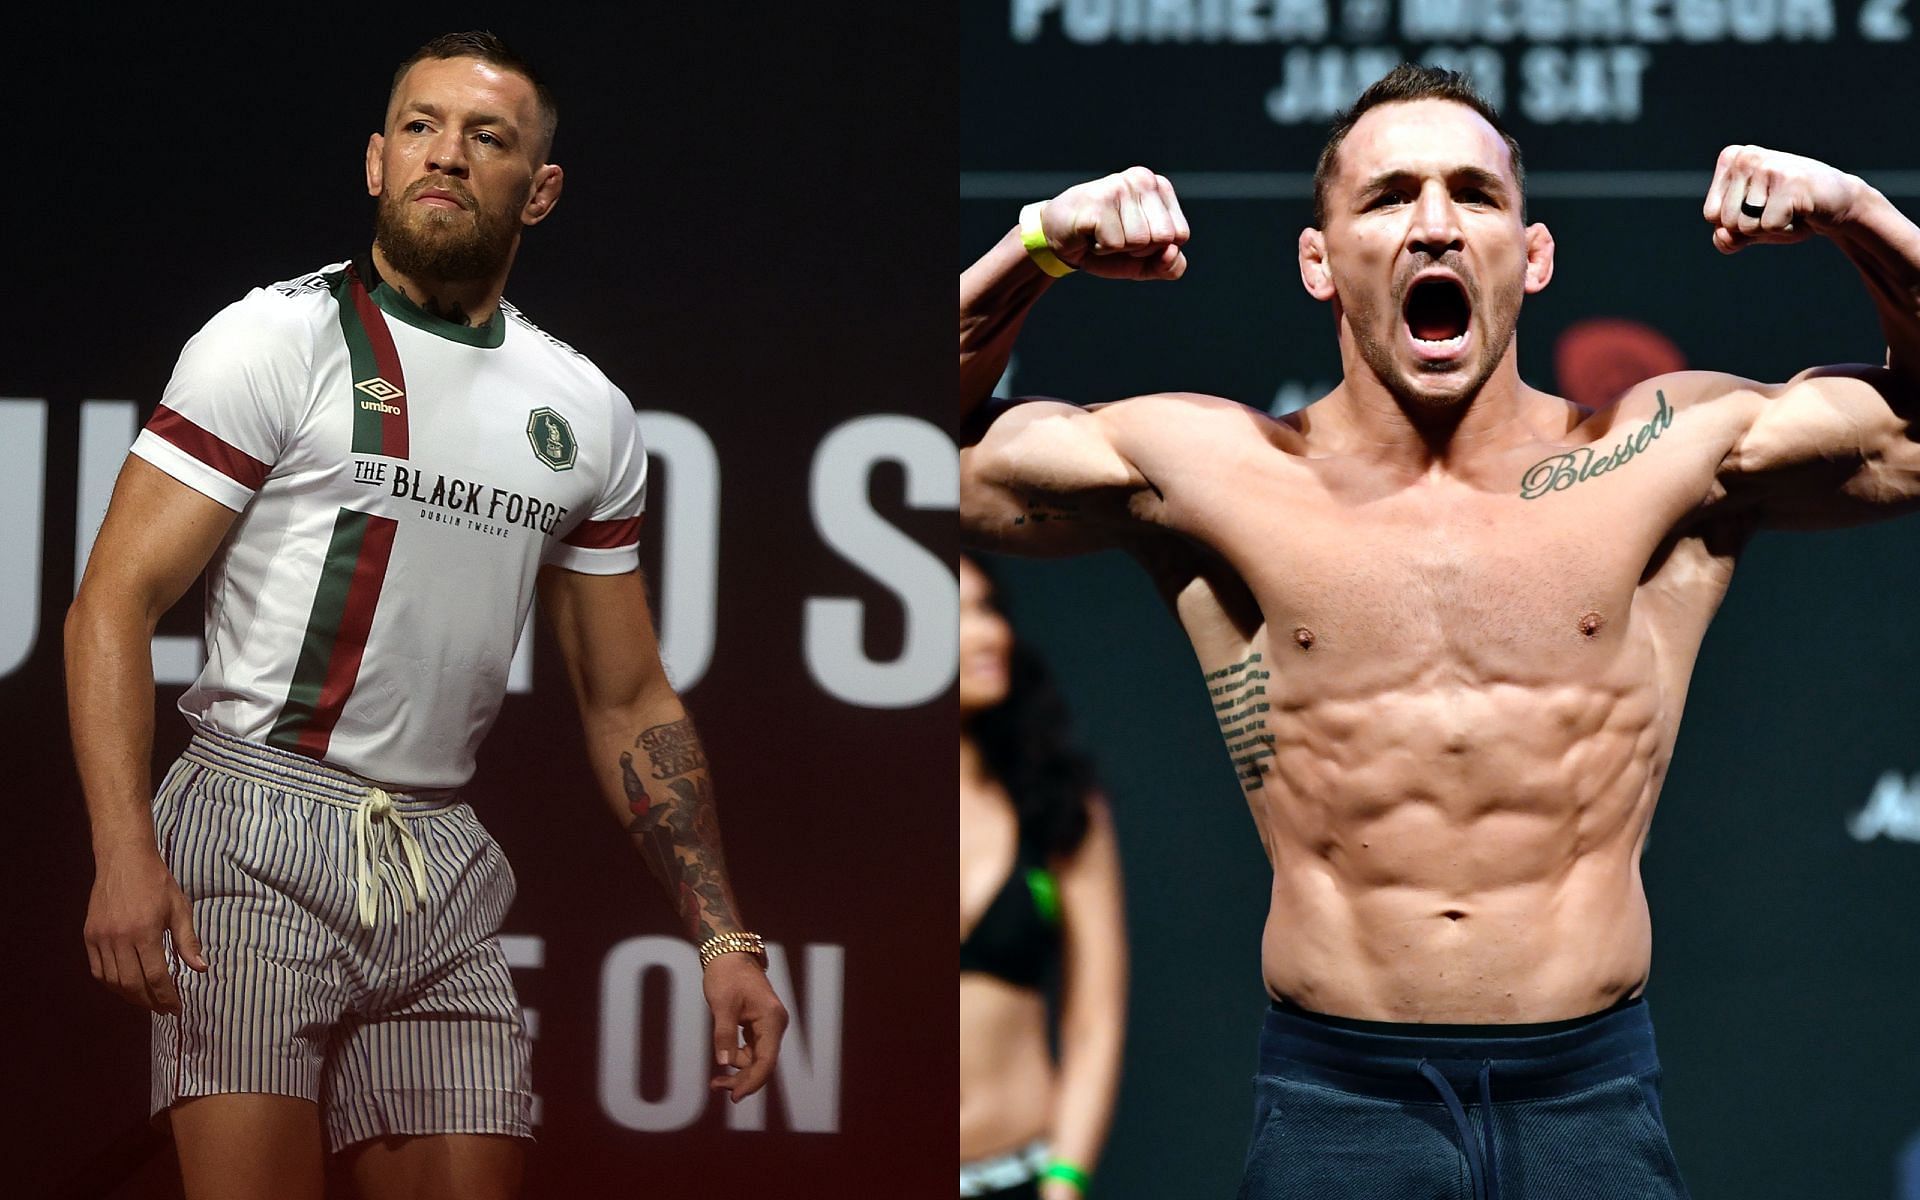 Conor McGregor (left) and Michael Chandler (right) [Image Courtesy: Getty Images]